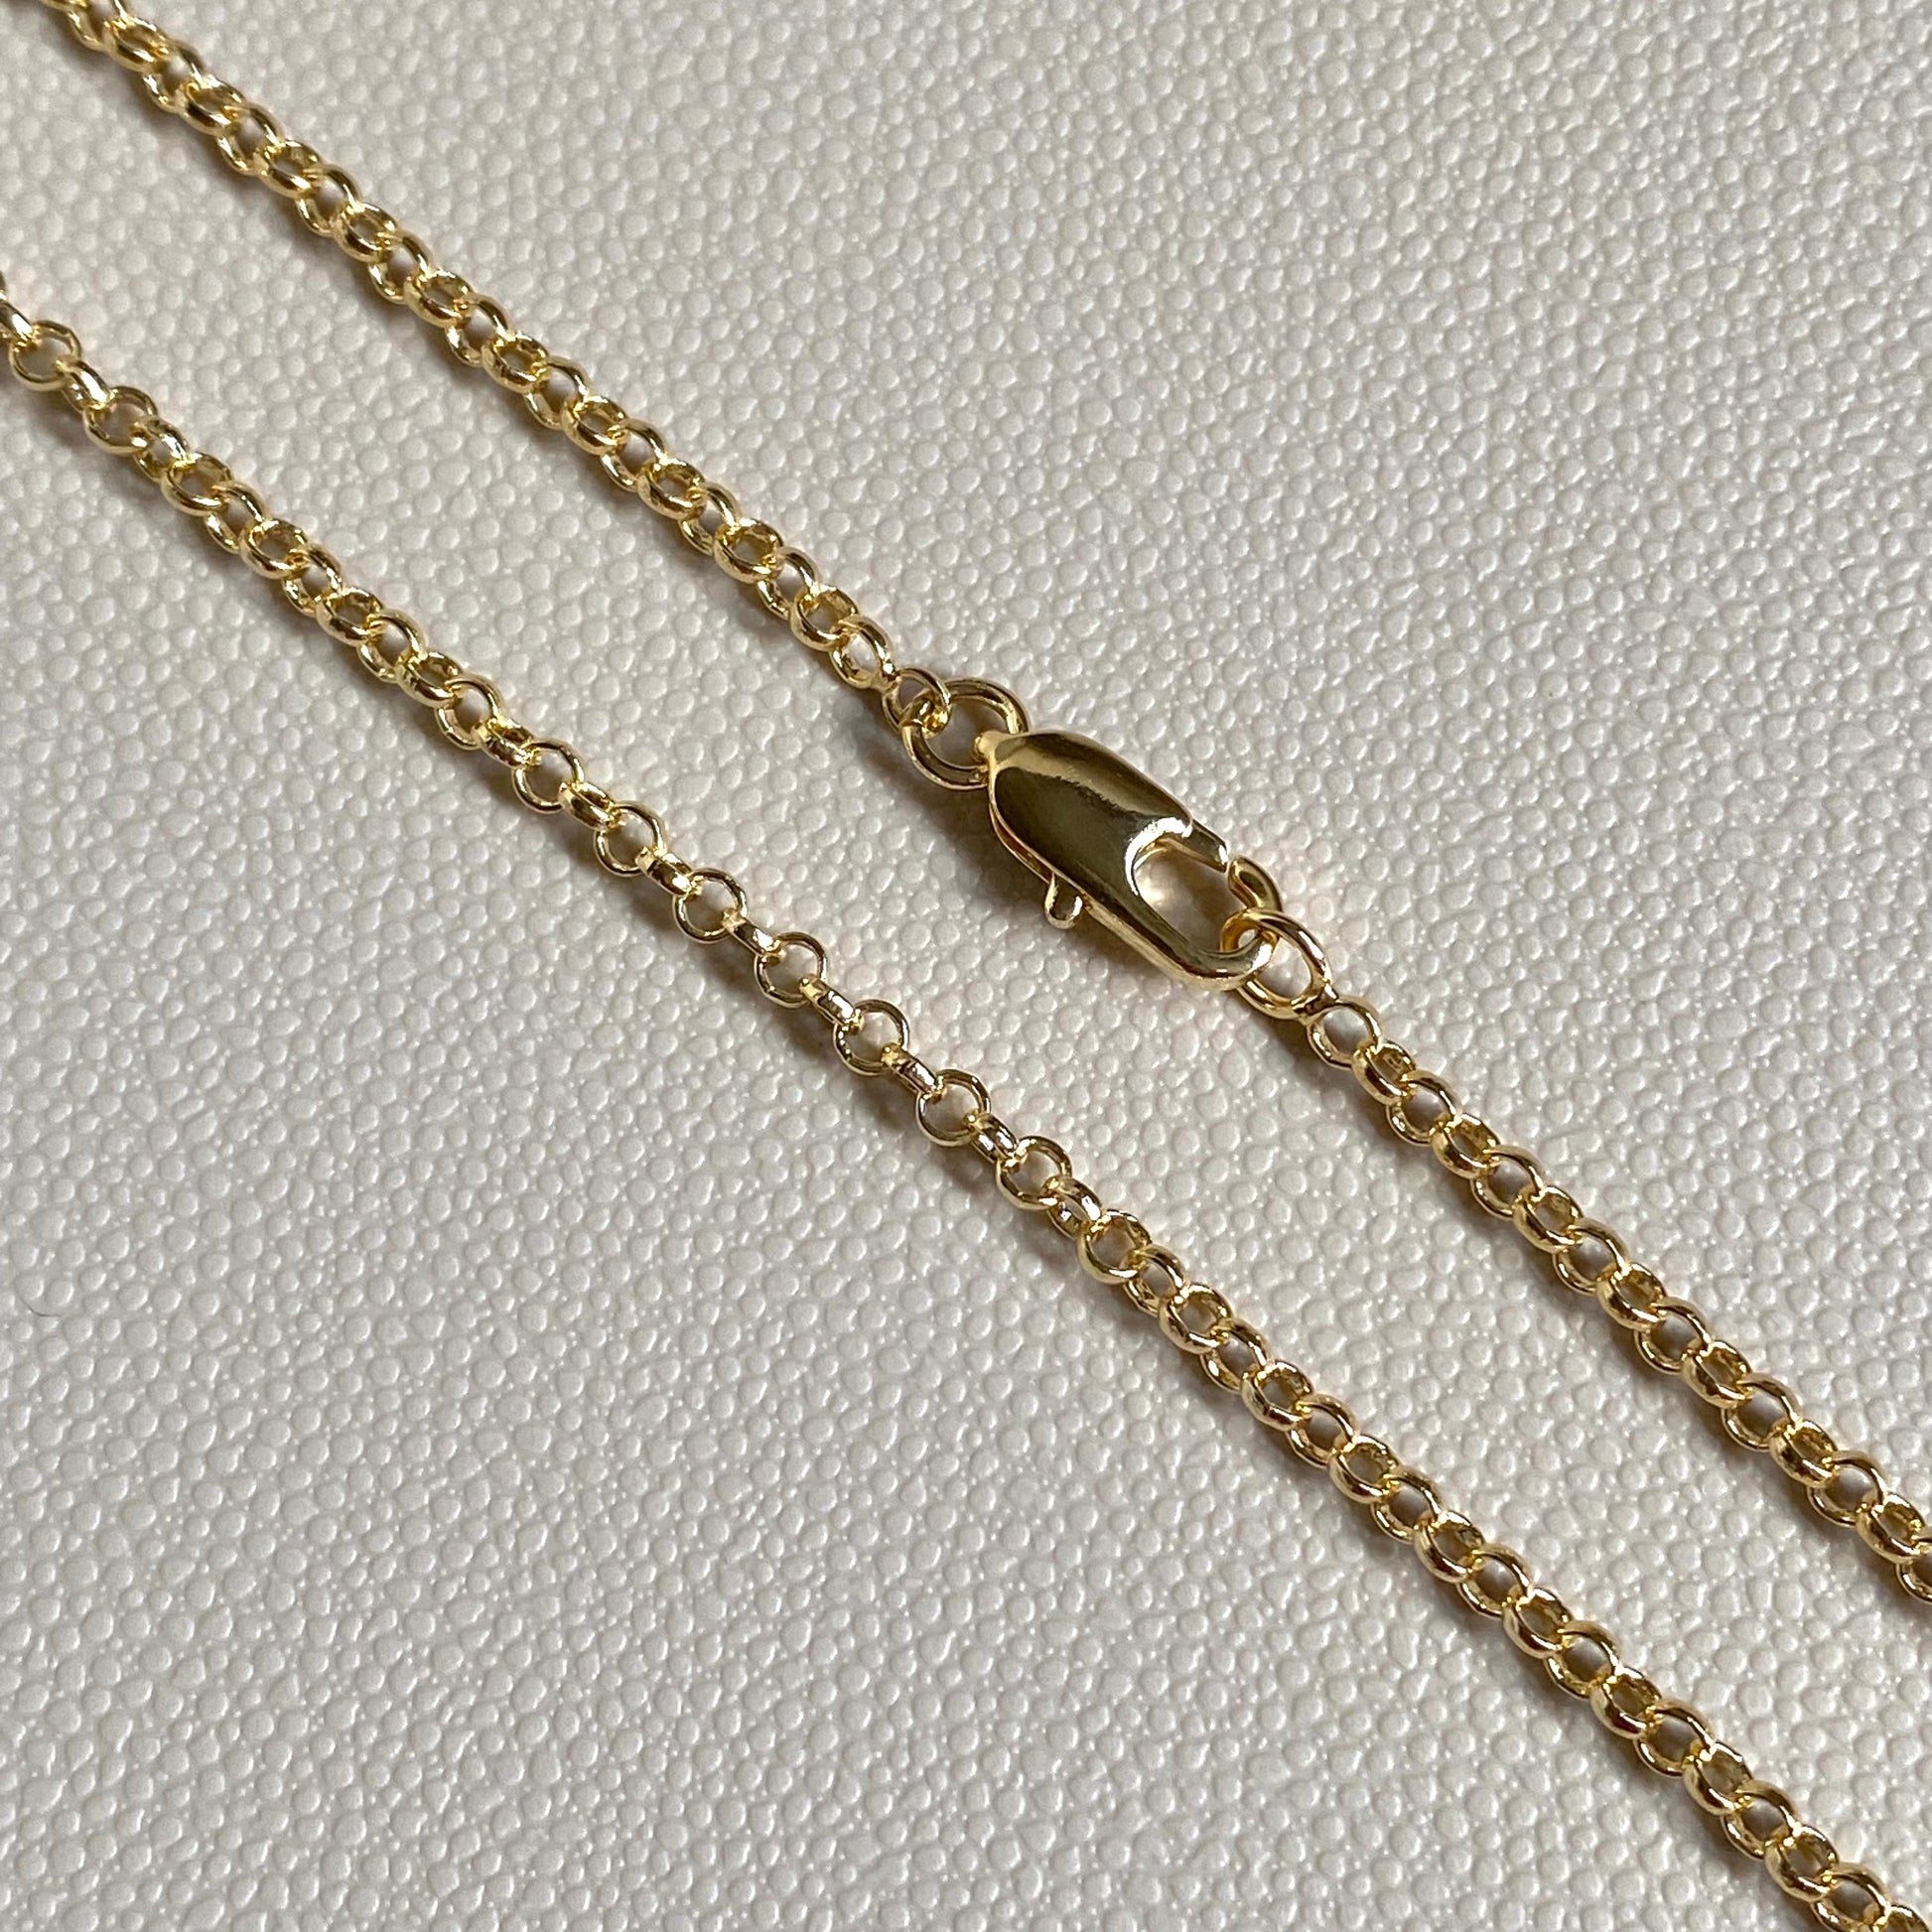 18k Gold Filled 2.5mm Rolo Chain Available in 16", 18", 20", 24"